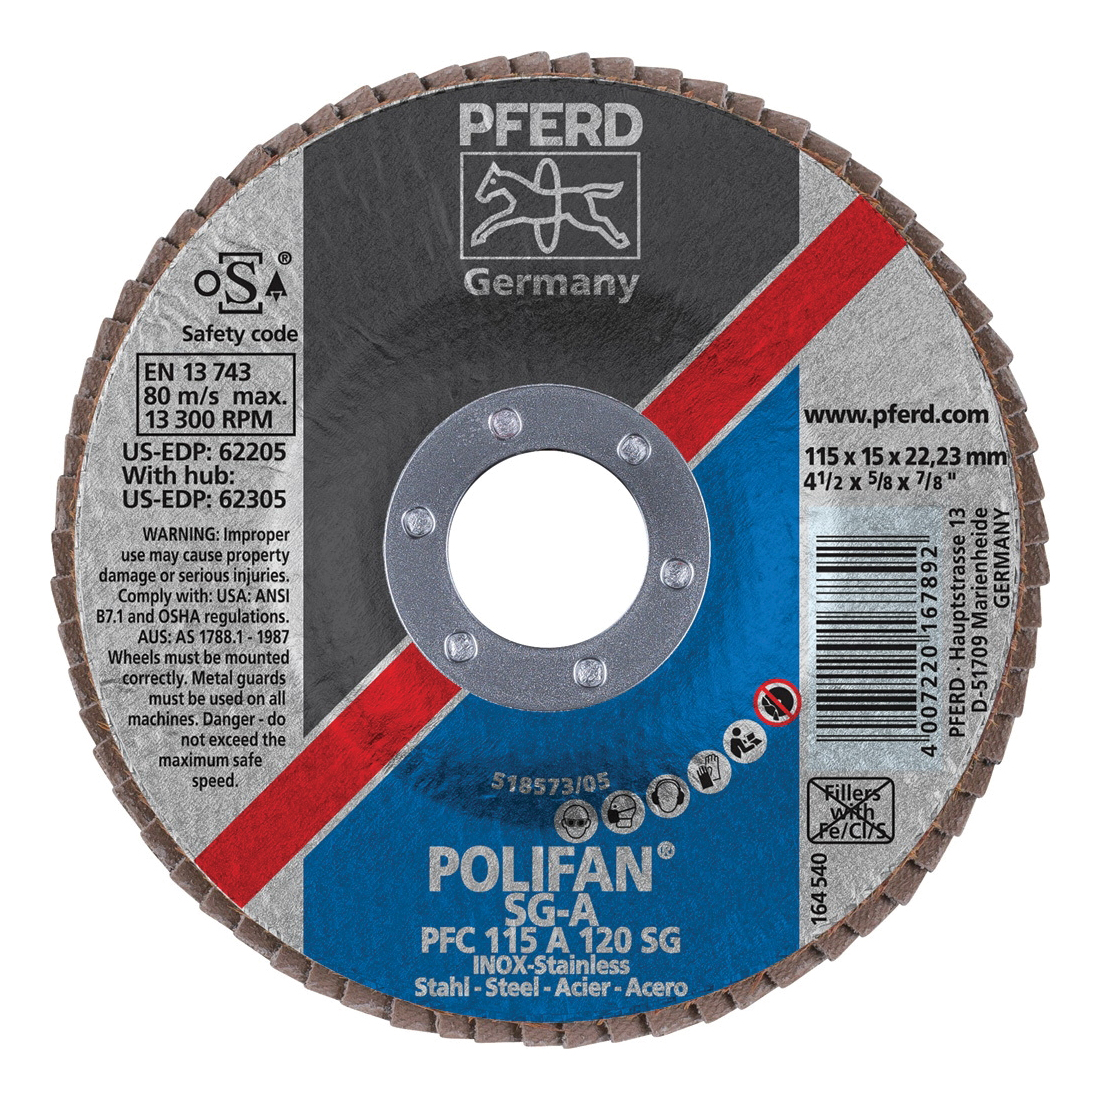 PFERD Polifan® 62205 Performance Line SG A Unthreaded Coated Abrasive Flap Disc, 4-1/2 in Dia, 7/8 in Center Hole, 120 Grit, Aluminum Oxide Abrasive, Type 29 Conical Disc